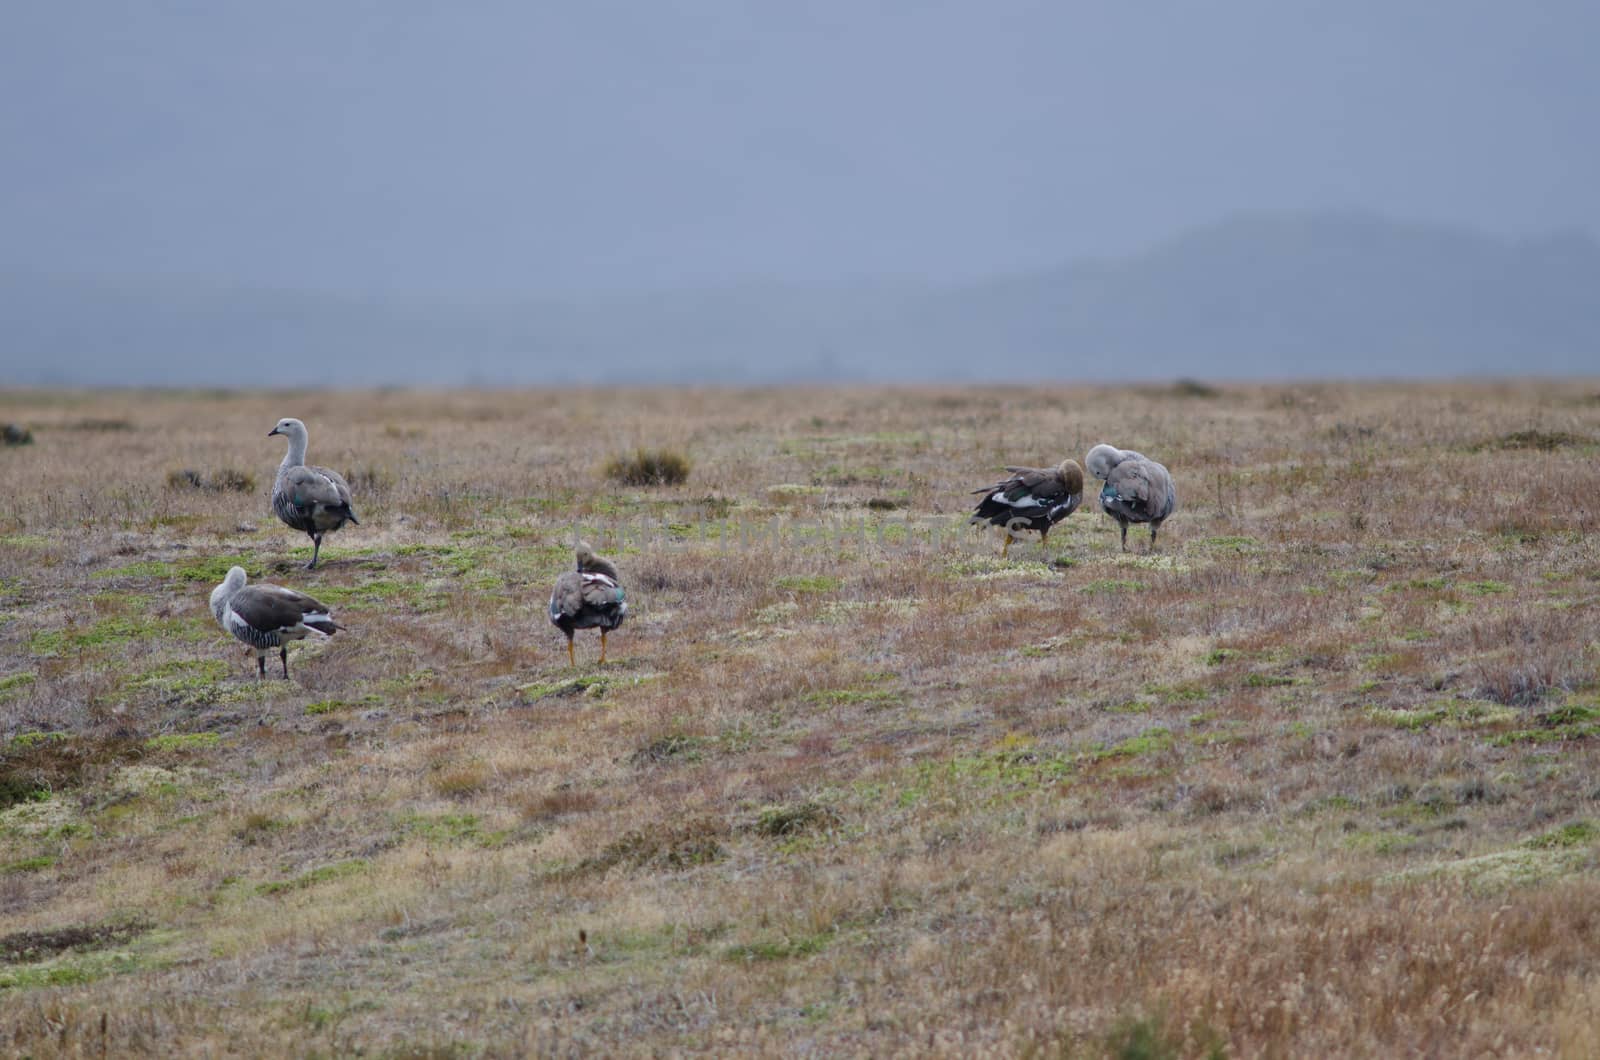 Upland Geese Chloephaga picta in a meadow. by VictorSuarez